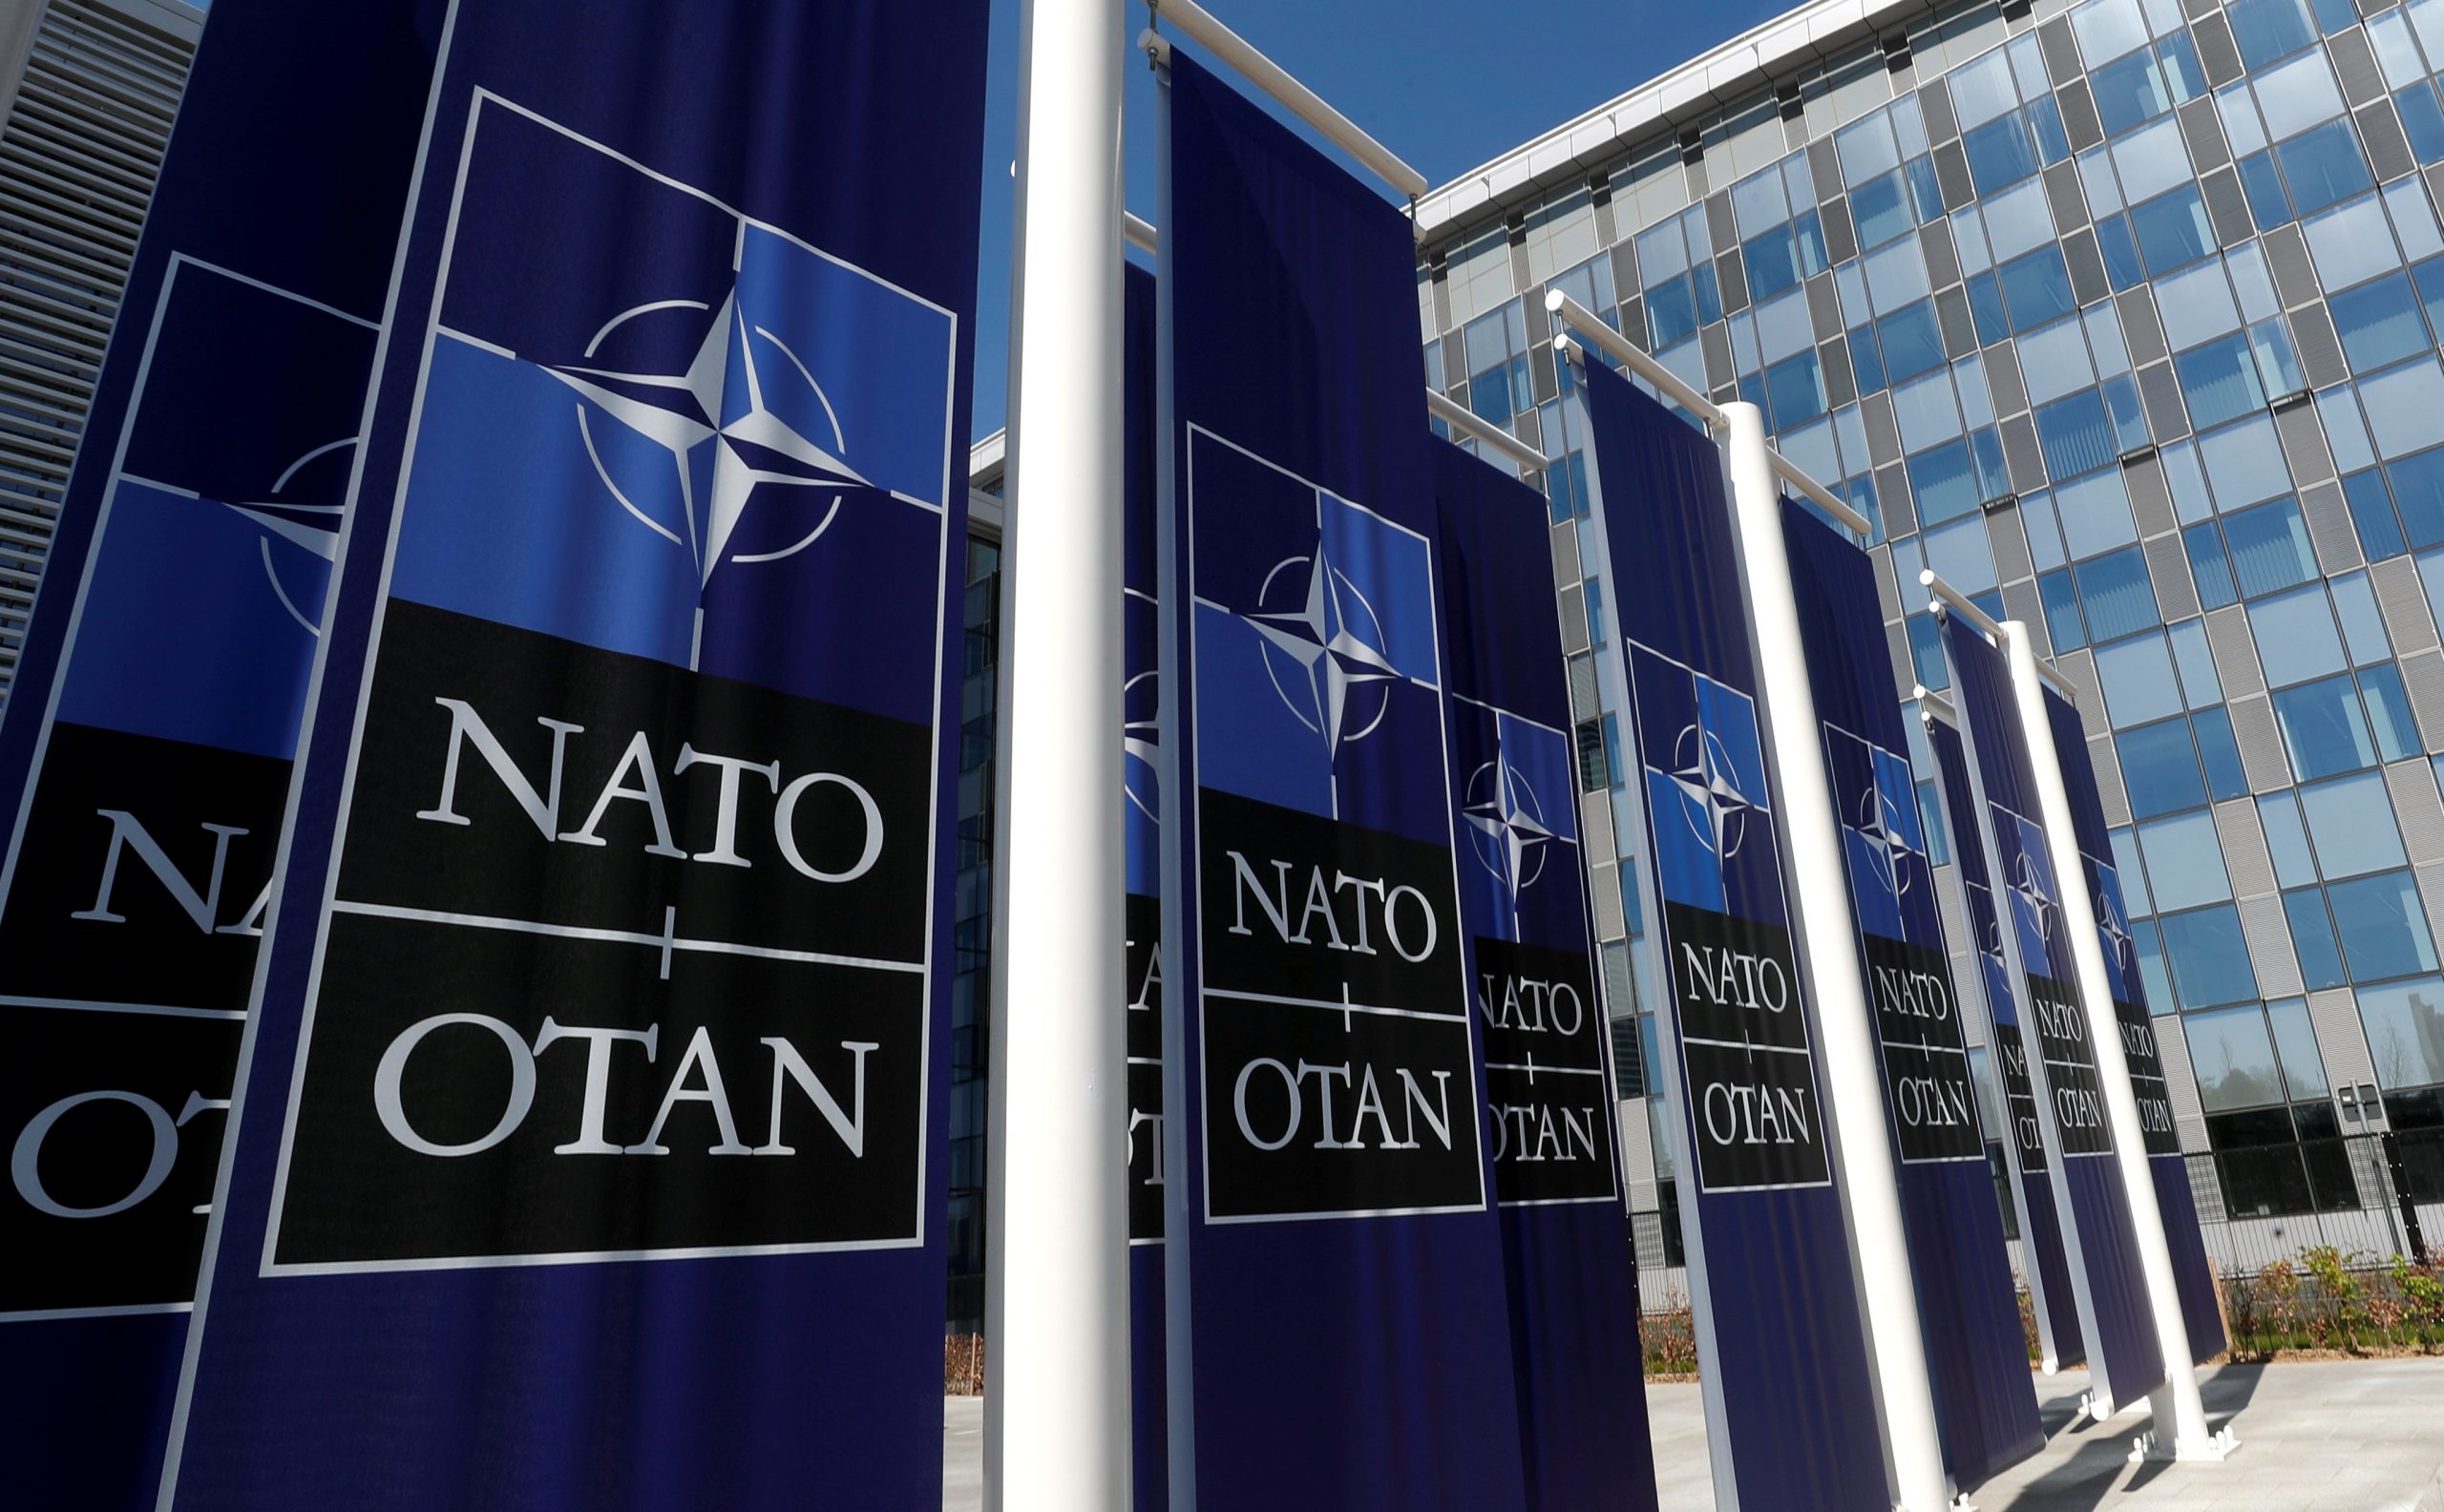 FILE PHOTO: Banners displaying the NATO logo are placed at the entrance of new NATO headquarters during the move to the new building FILE PHOTO: Banners displaying the NATO logo are placed at the entrance of new NATO headquarters during the move to the new building, in Brussels, Belgium April 19, 2018.  REUTERS/Yves Herman/File Photo YVES HERMAN